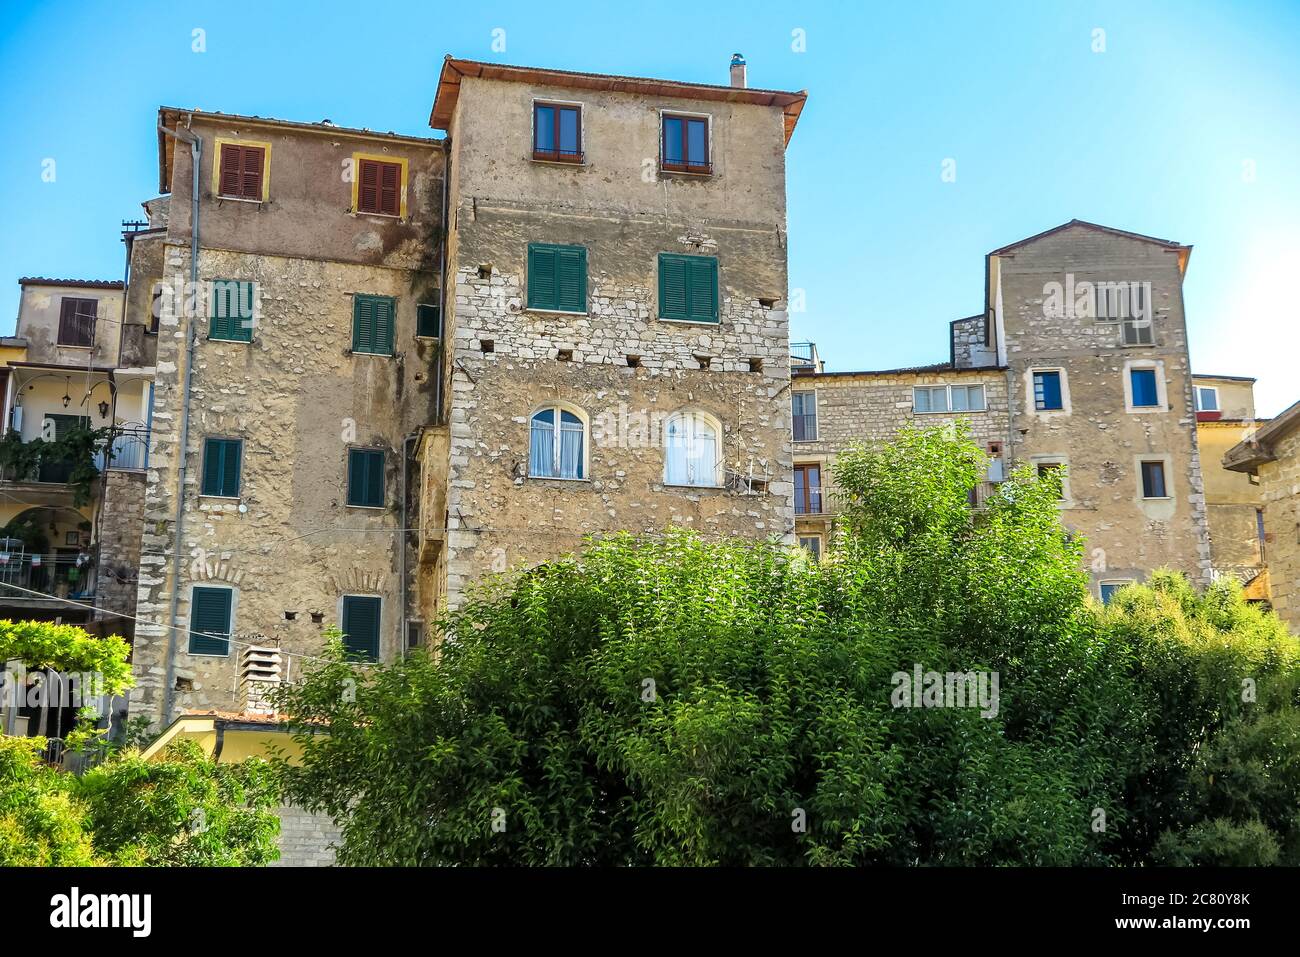 Bottom view of the centenary houses of the commune of Lenola, province of Latina, Italy Stock Photo